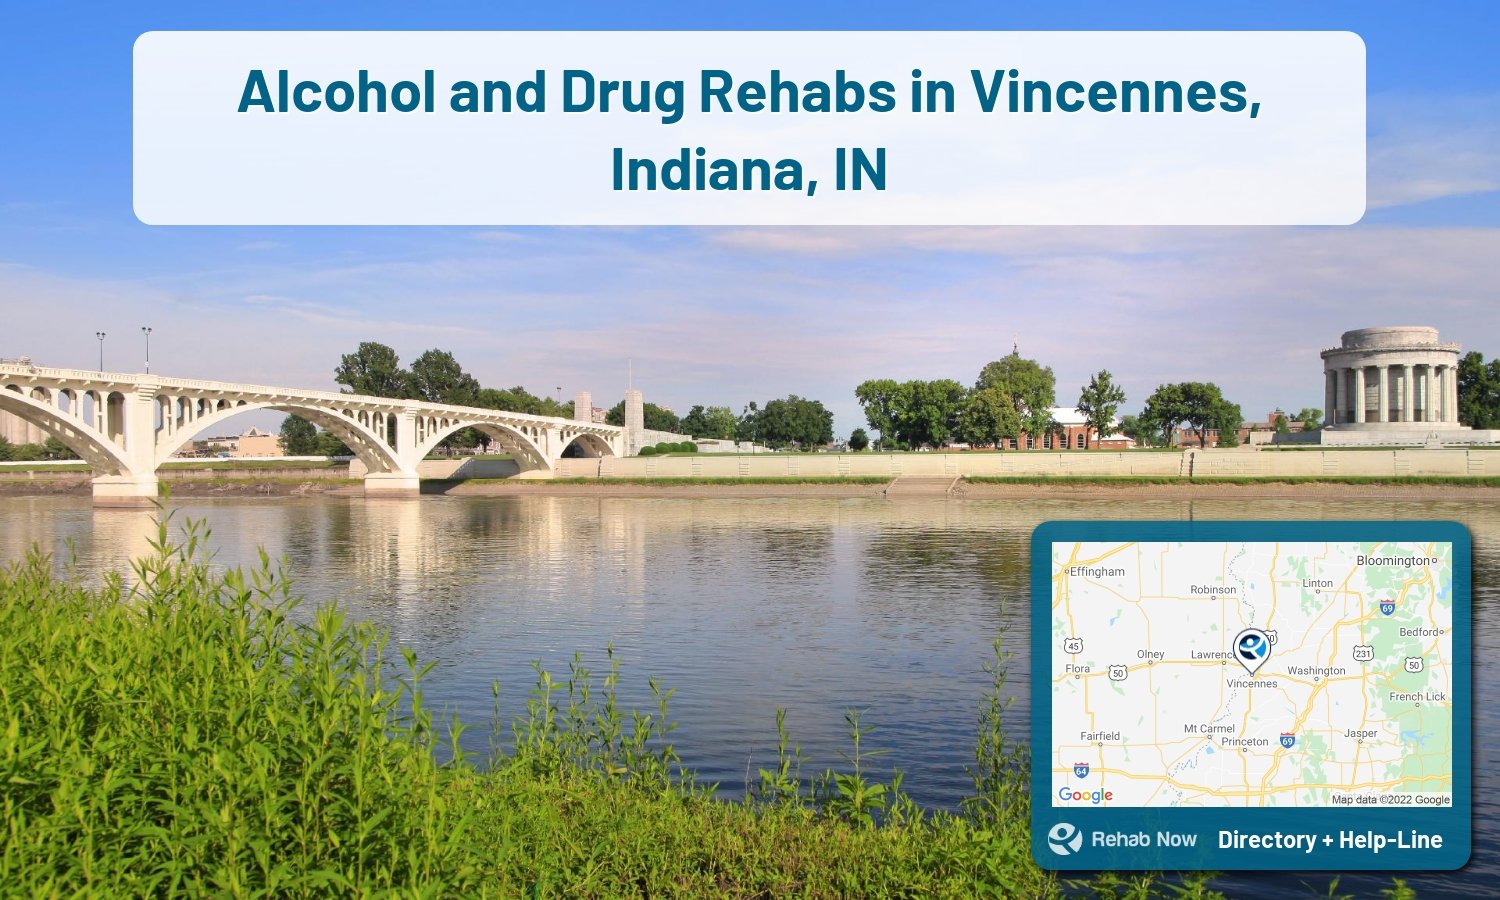 Ready to pick a rehab center in Vincennes? Get off alcohol, opiates, and other drugs, by selecting top drug rehab centers in Indiana